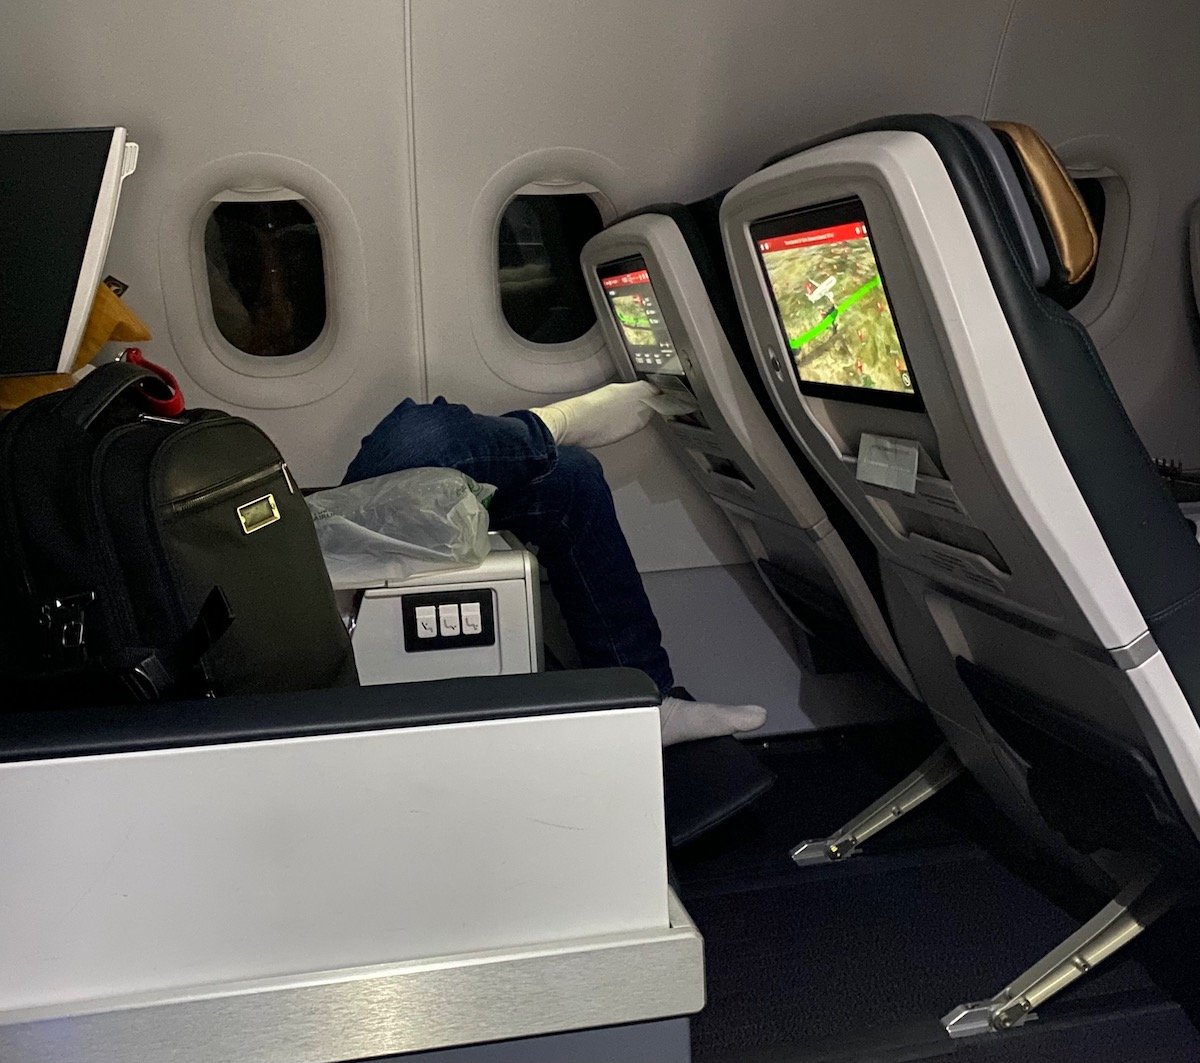 turkish airlines business class a321